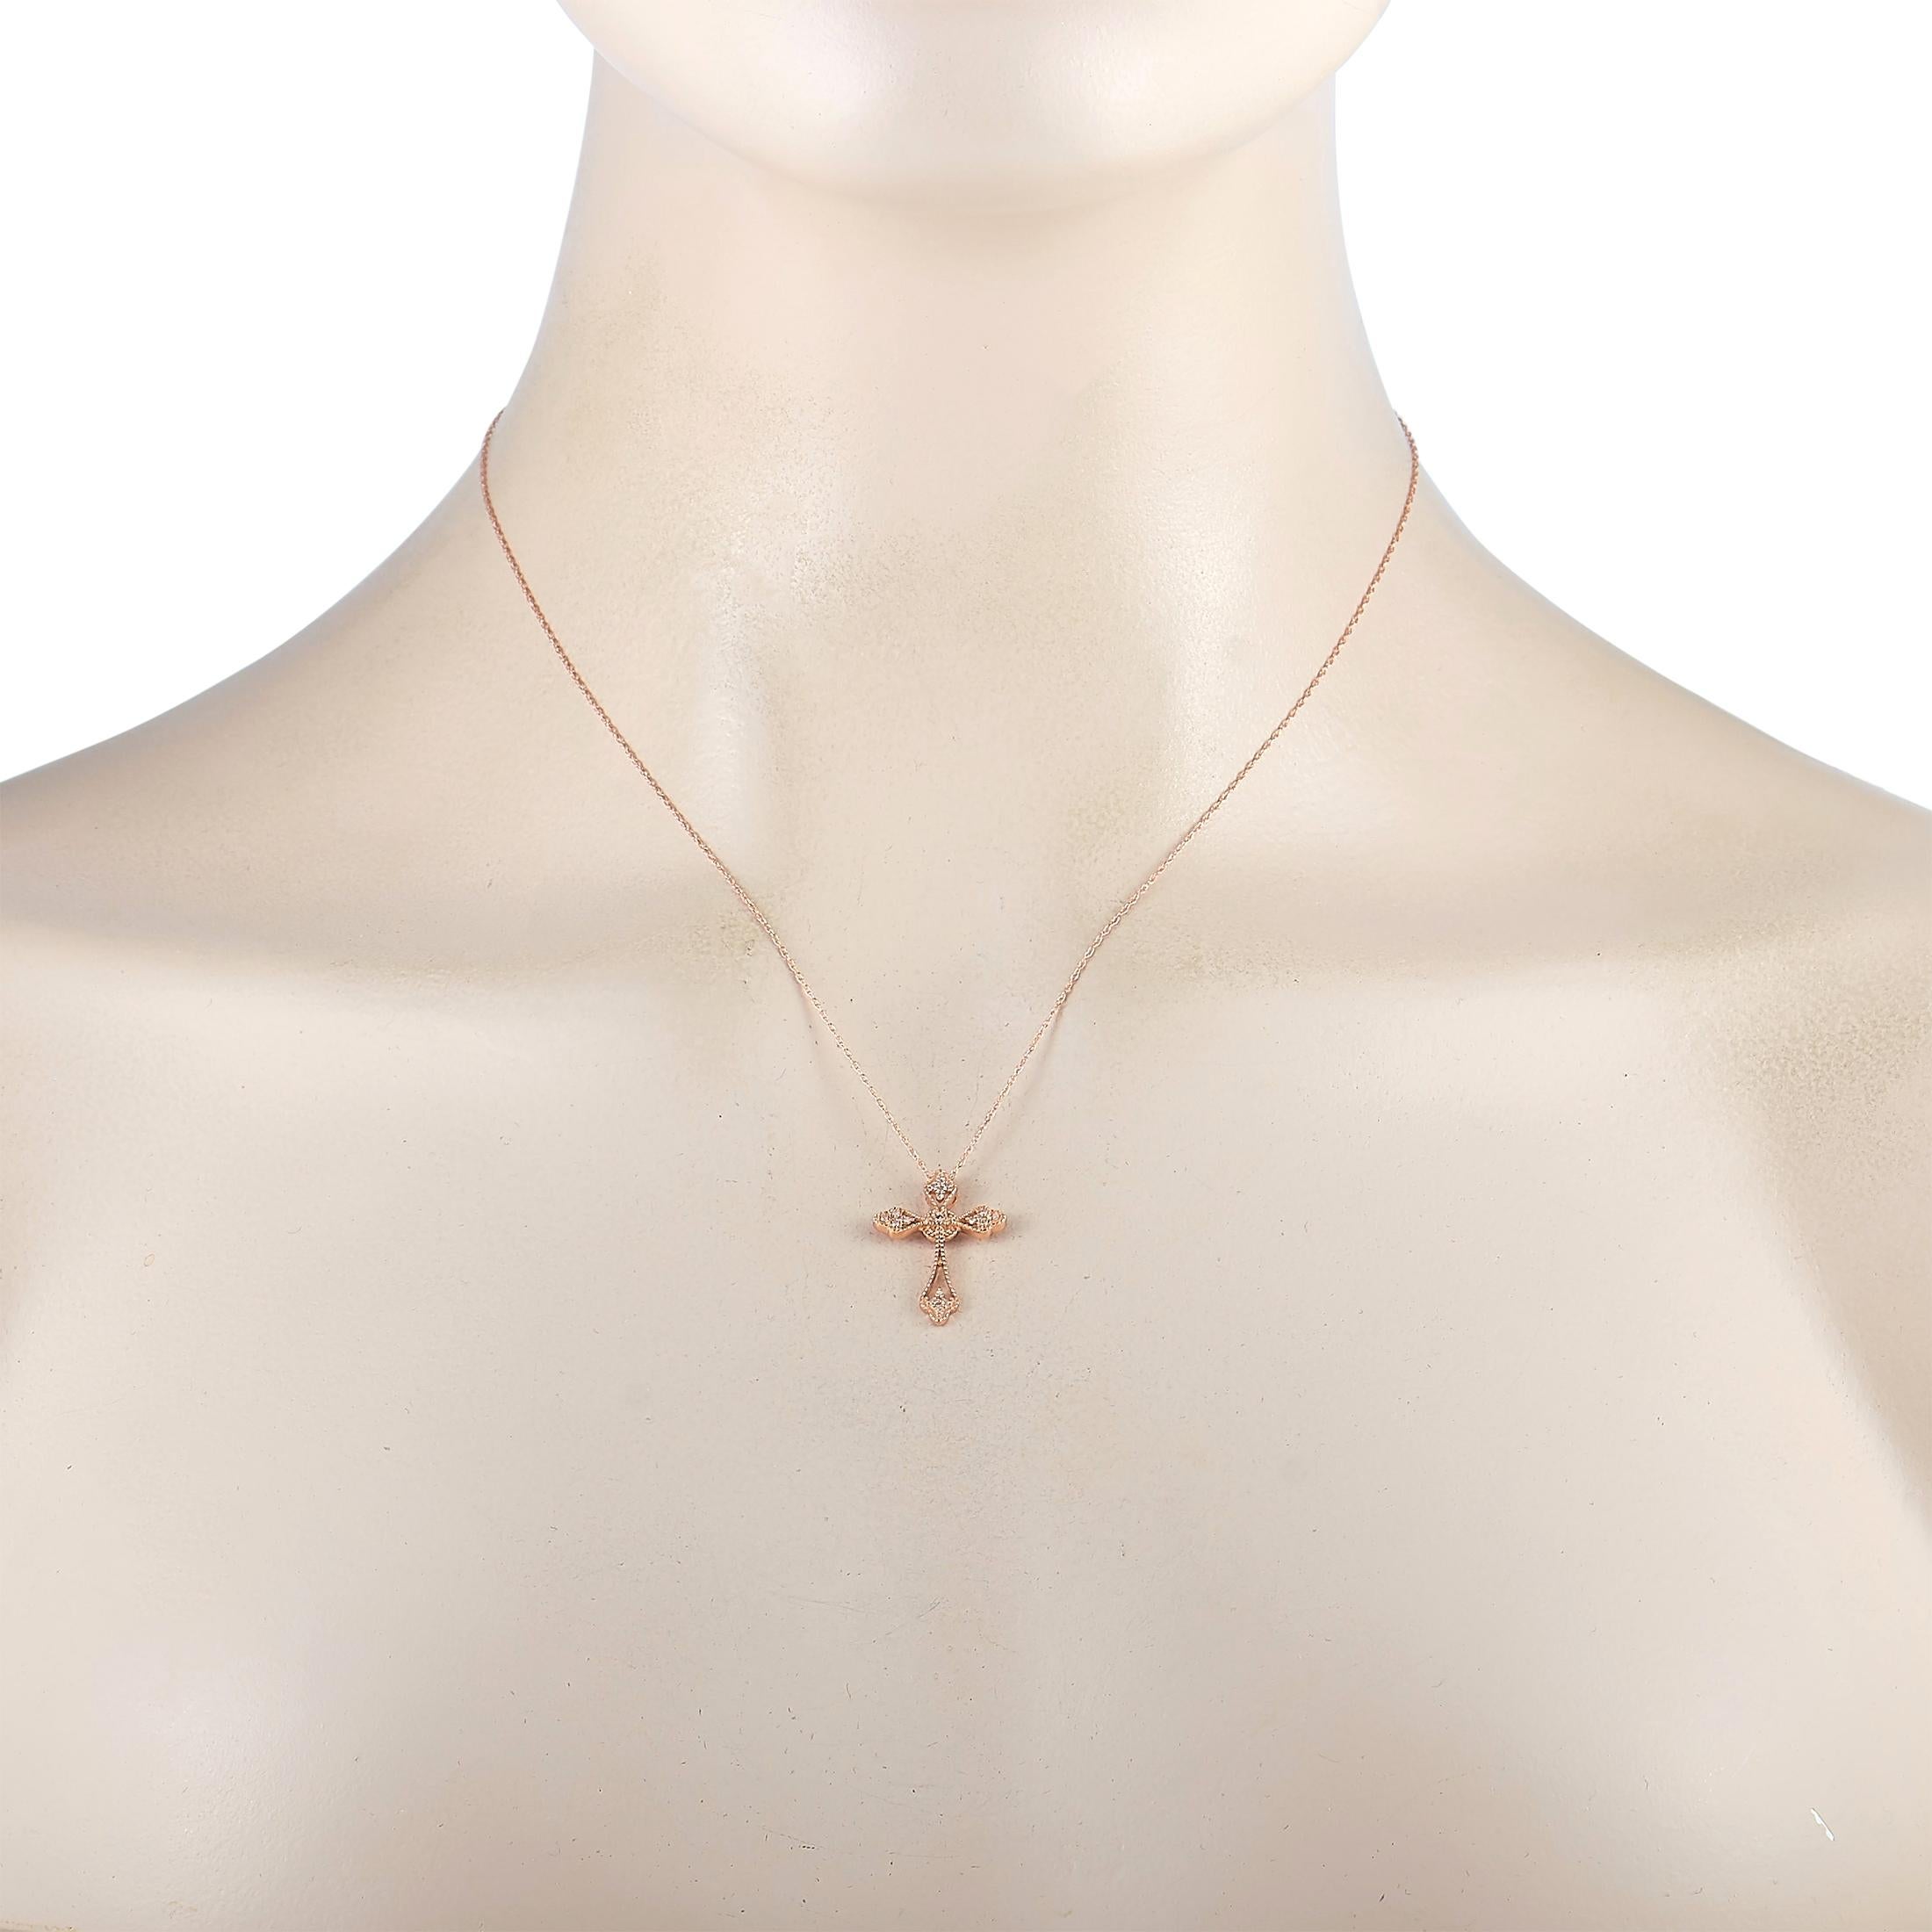 This LB Exclusive necklace is made of 14K rose gold and embellished with diamonds that amount to 0.10 carats. The necklace weighs 1.5 grams and is presented with a 17” chain and a cross pendant that measures 0.87” in length and 0.62” in